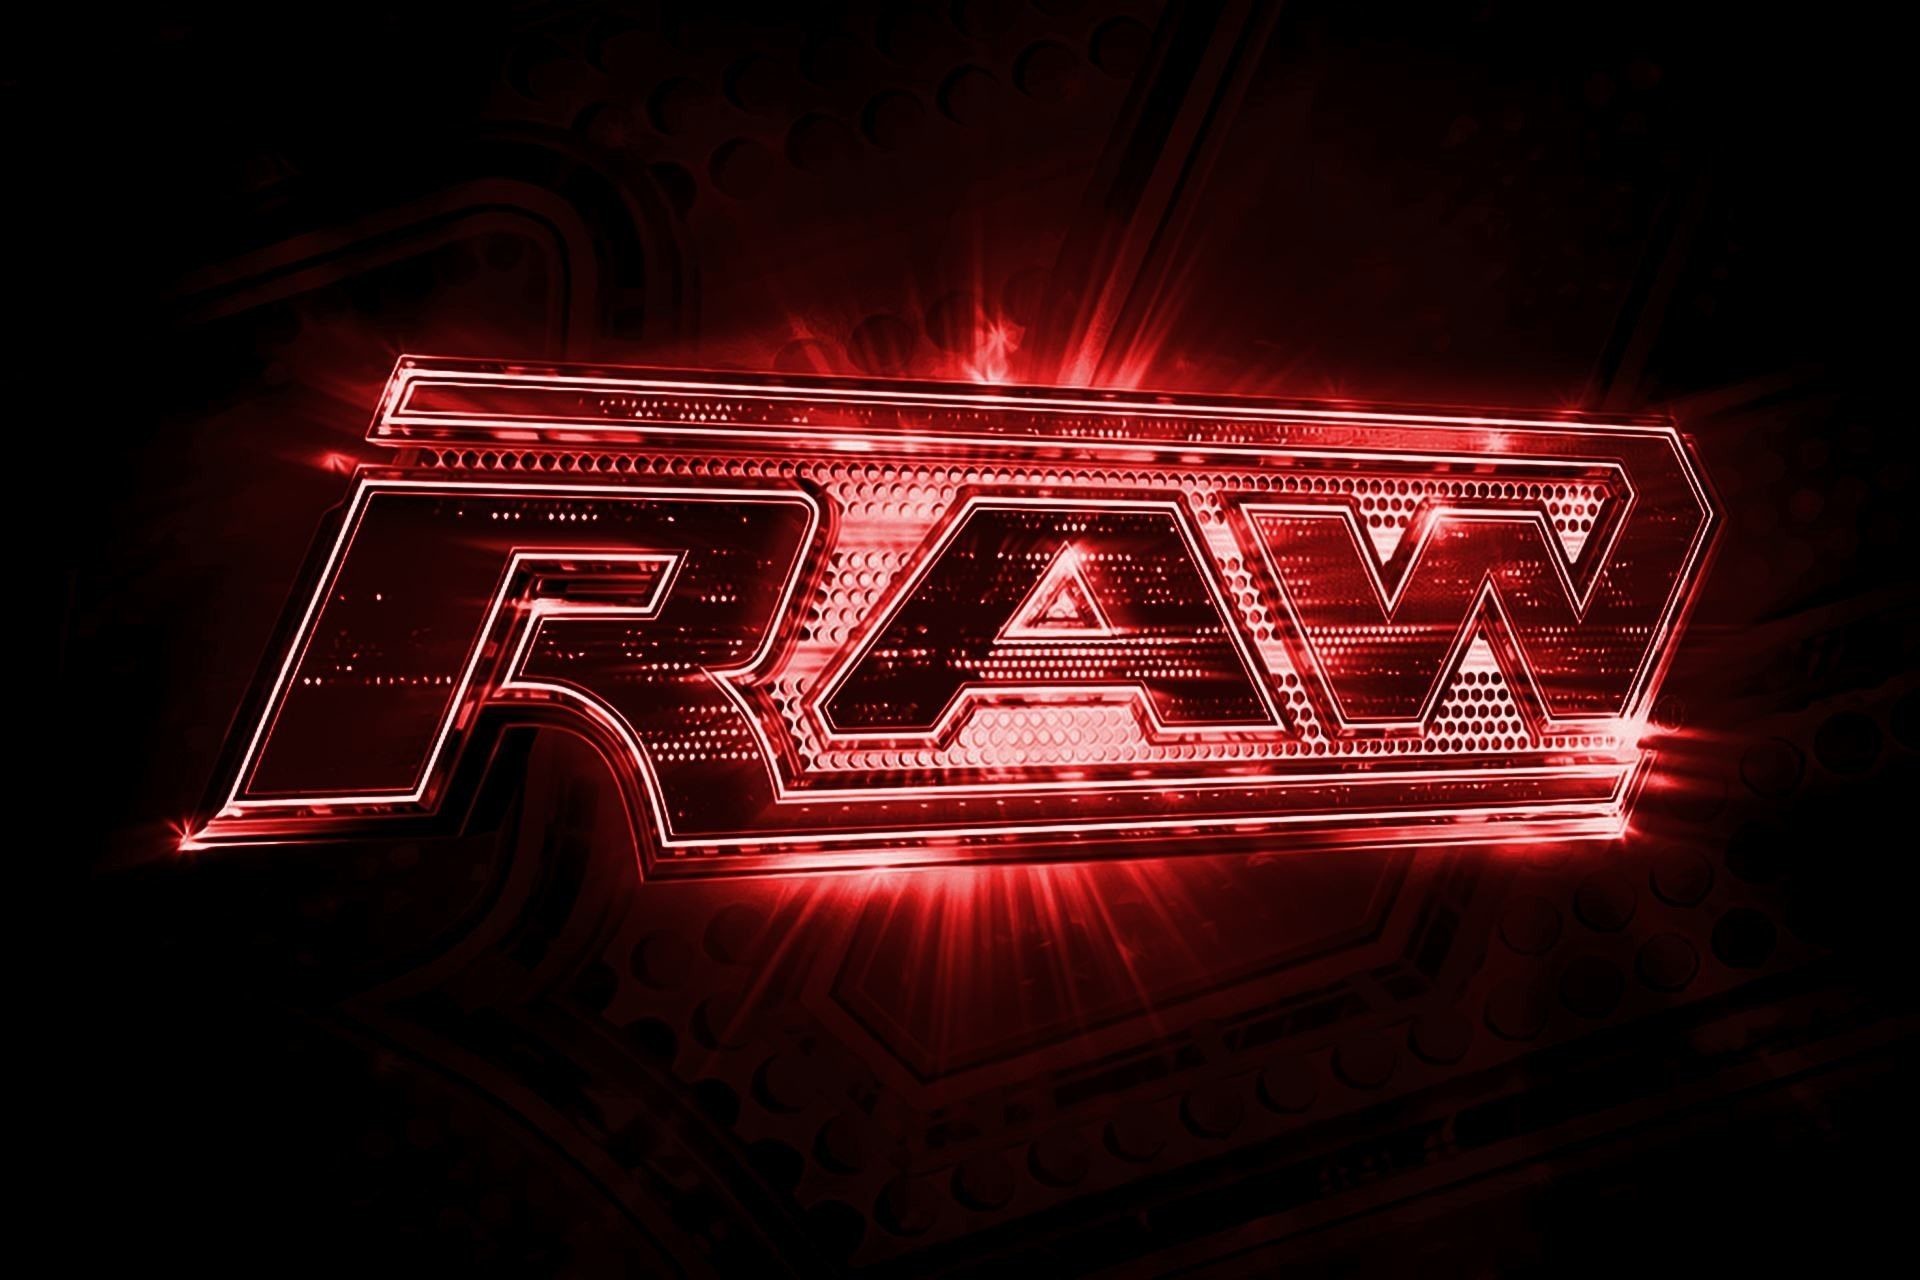 Raw Wallpapers